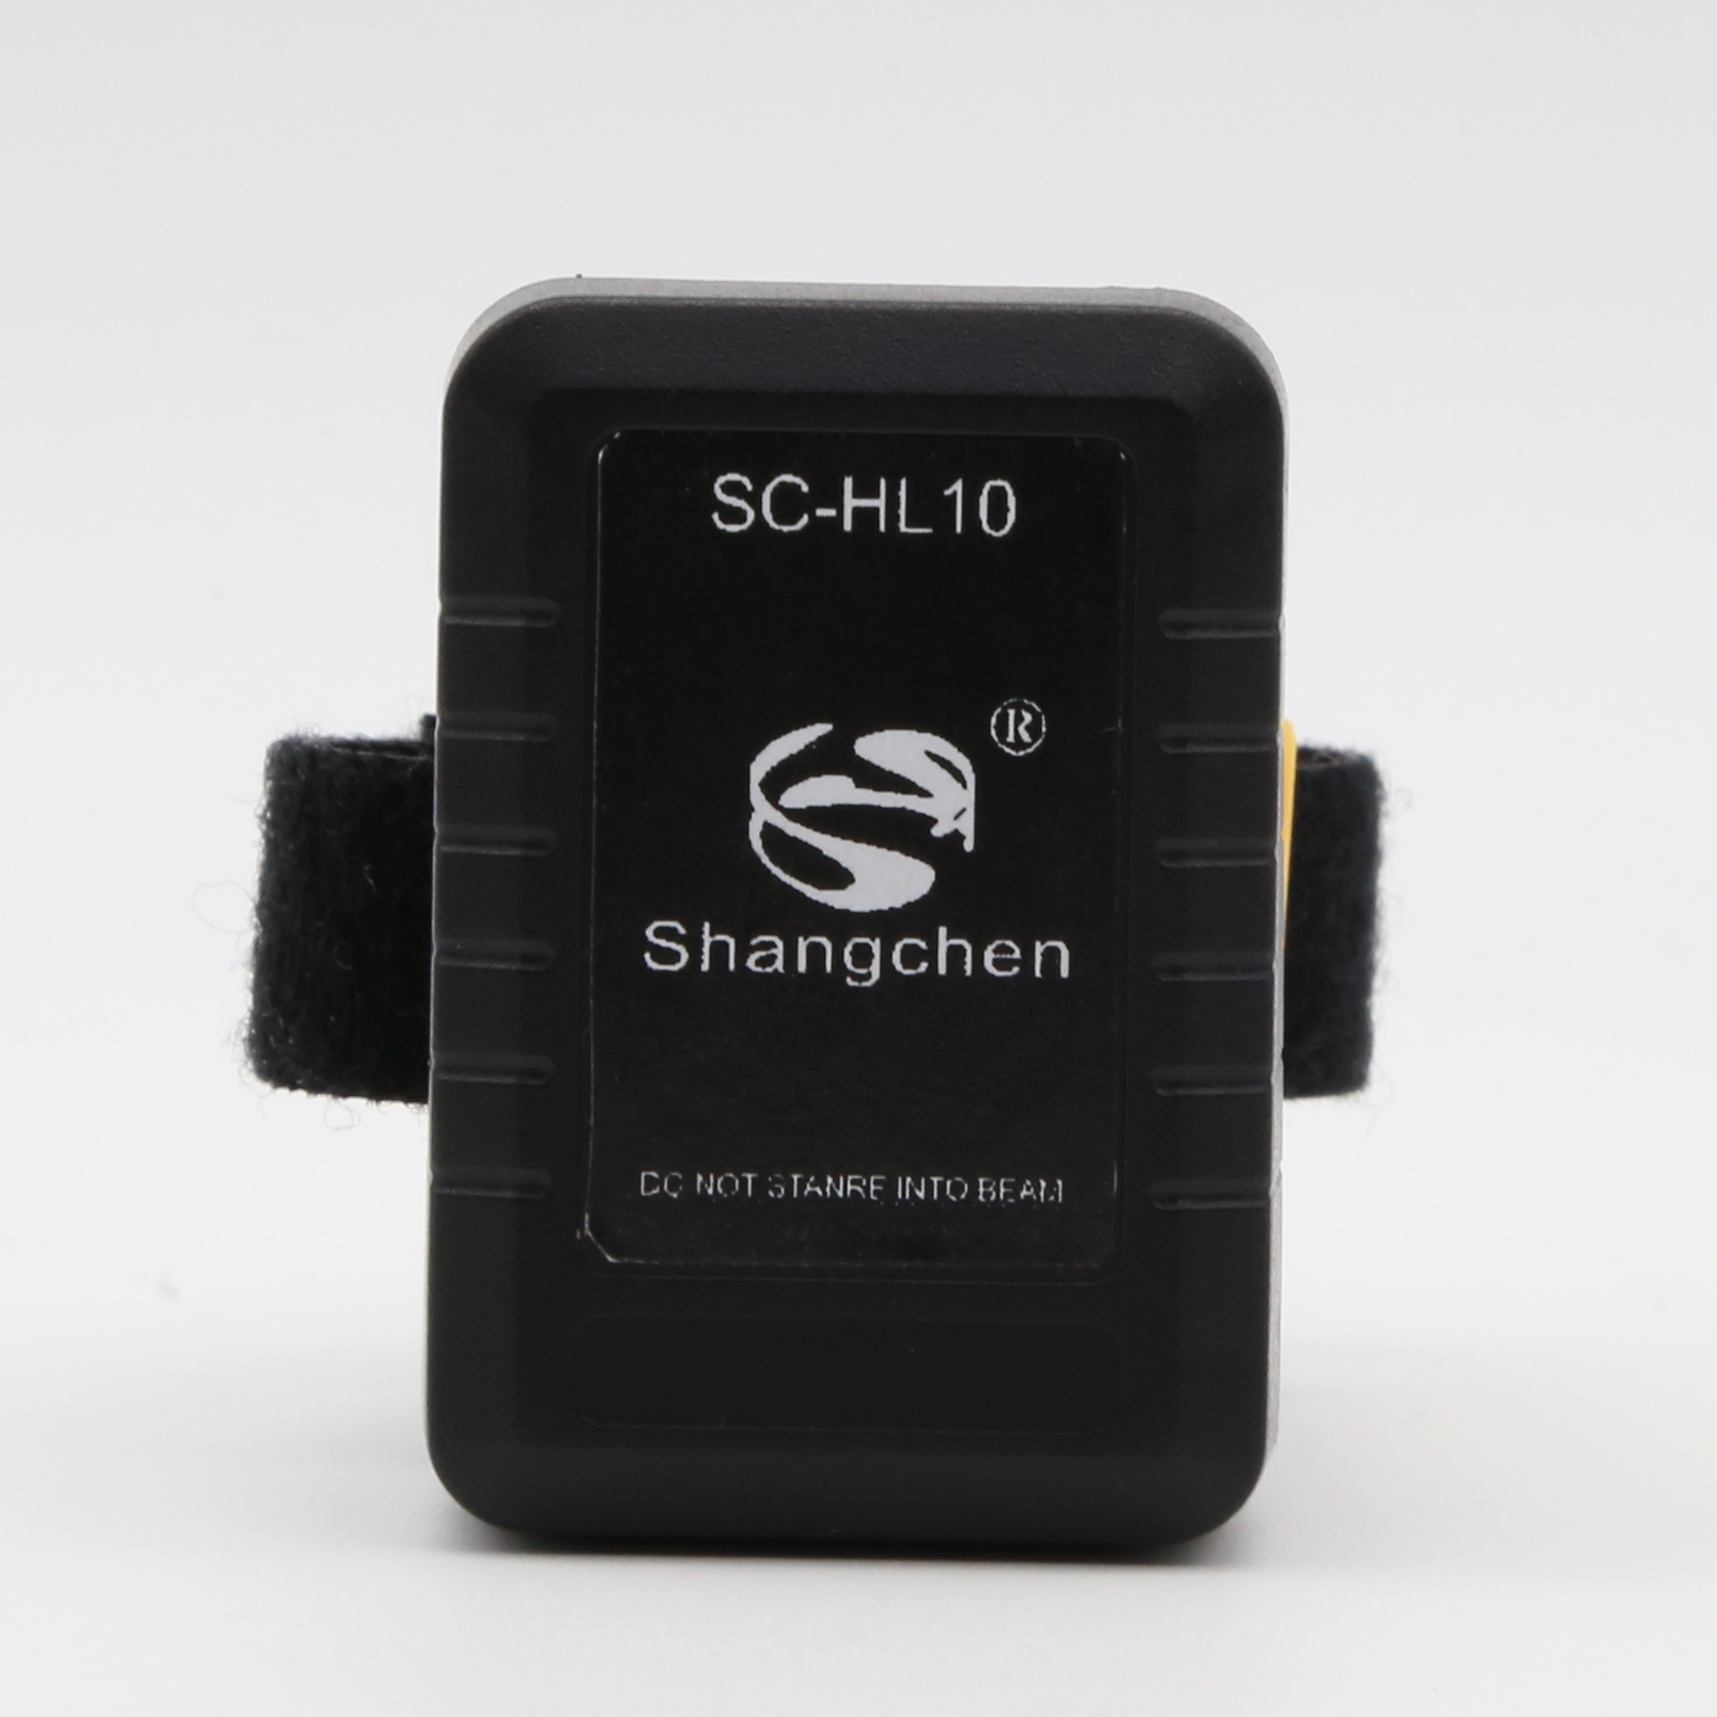 Shangchen-SC-HL10-Barcode-Scanner-Two-dimensional-Image-Wireless-bluetooth-Wearable-Finger-Ring-Barc-1419759-4